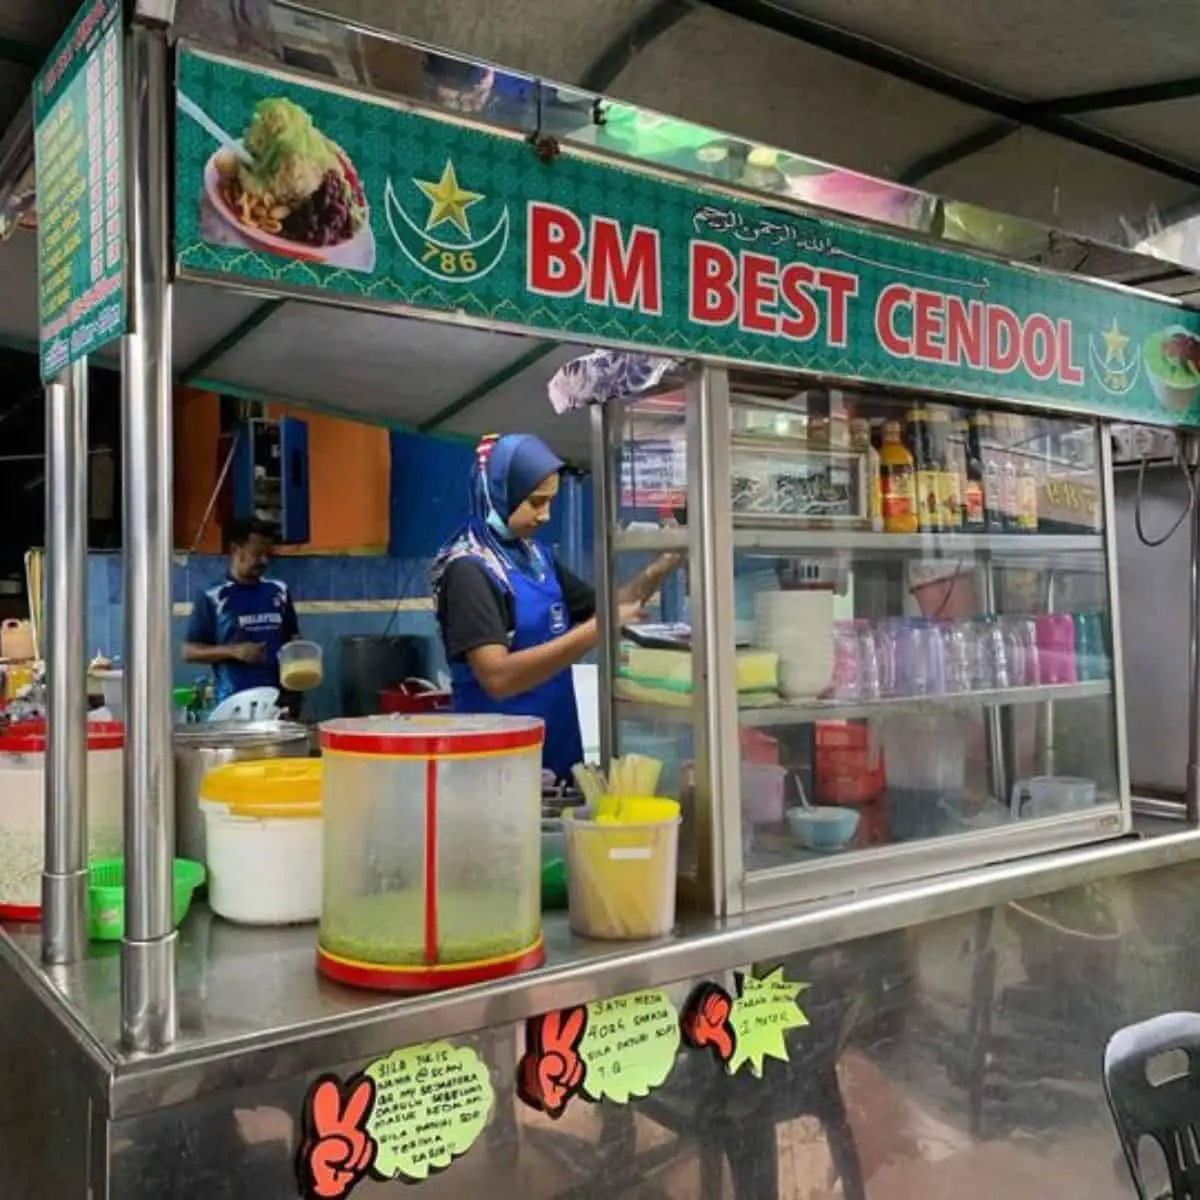 BM Best Cendol stall with two busy staff in blue uniform with green and red signage theme